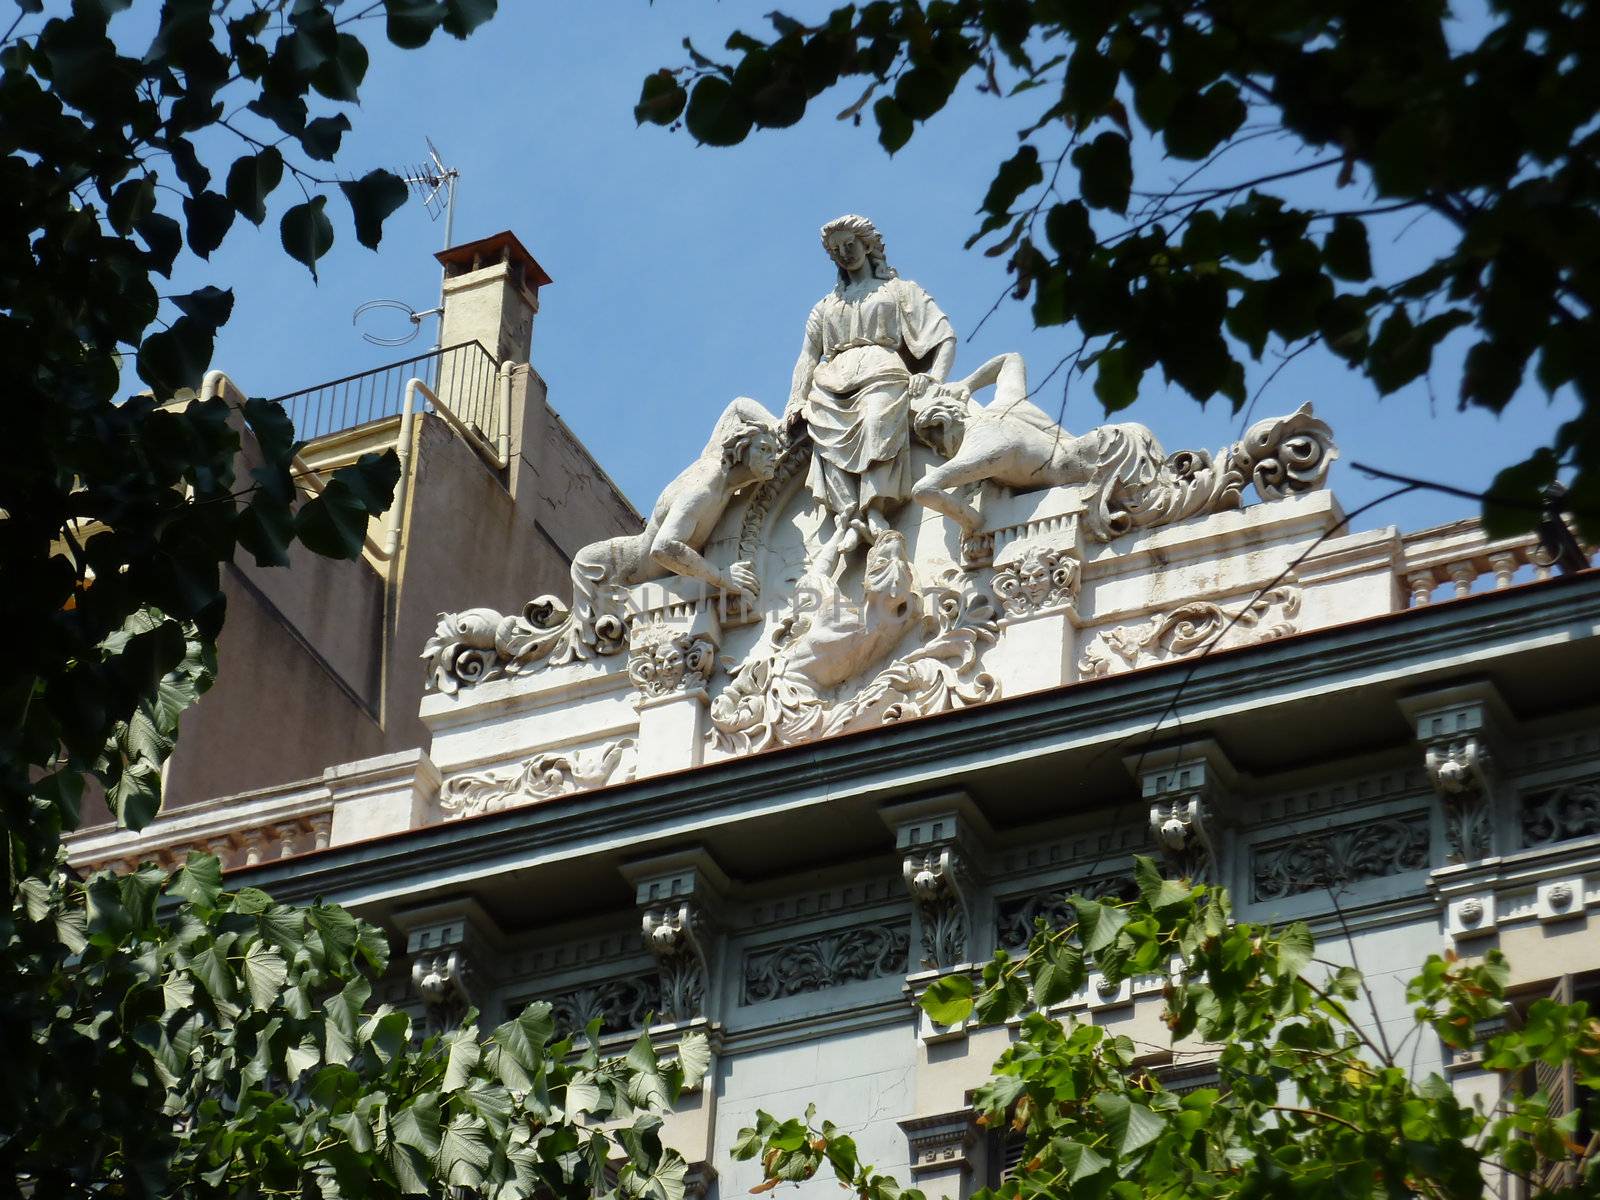 Sculpture of a woman and two men sirens on the top of a roof